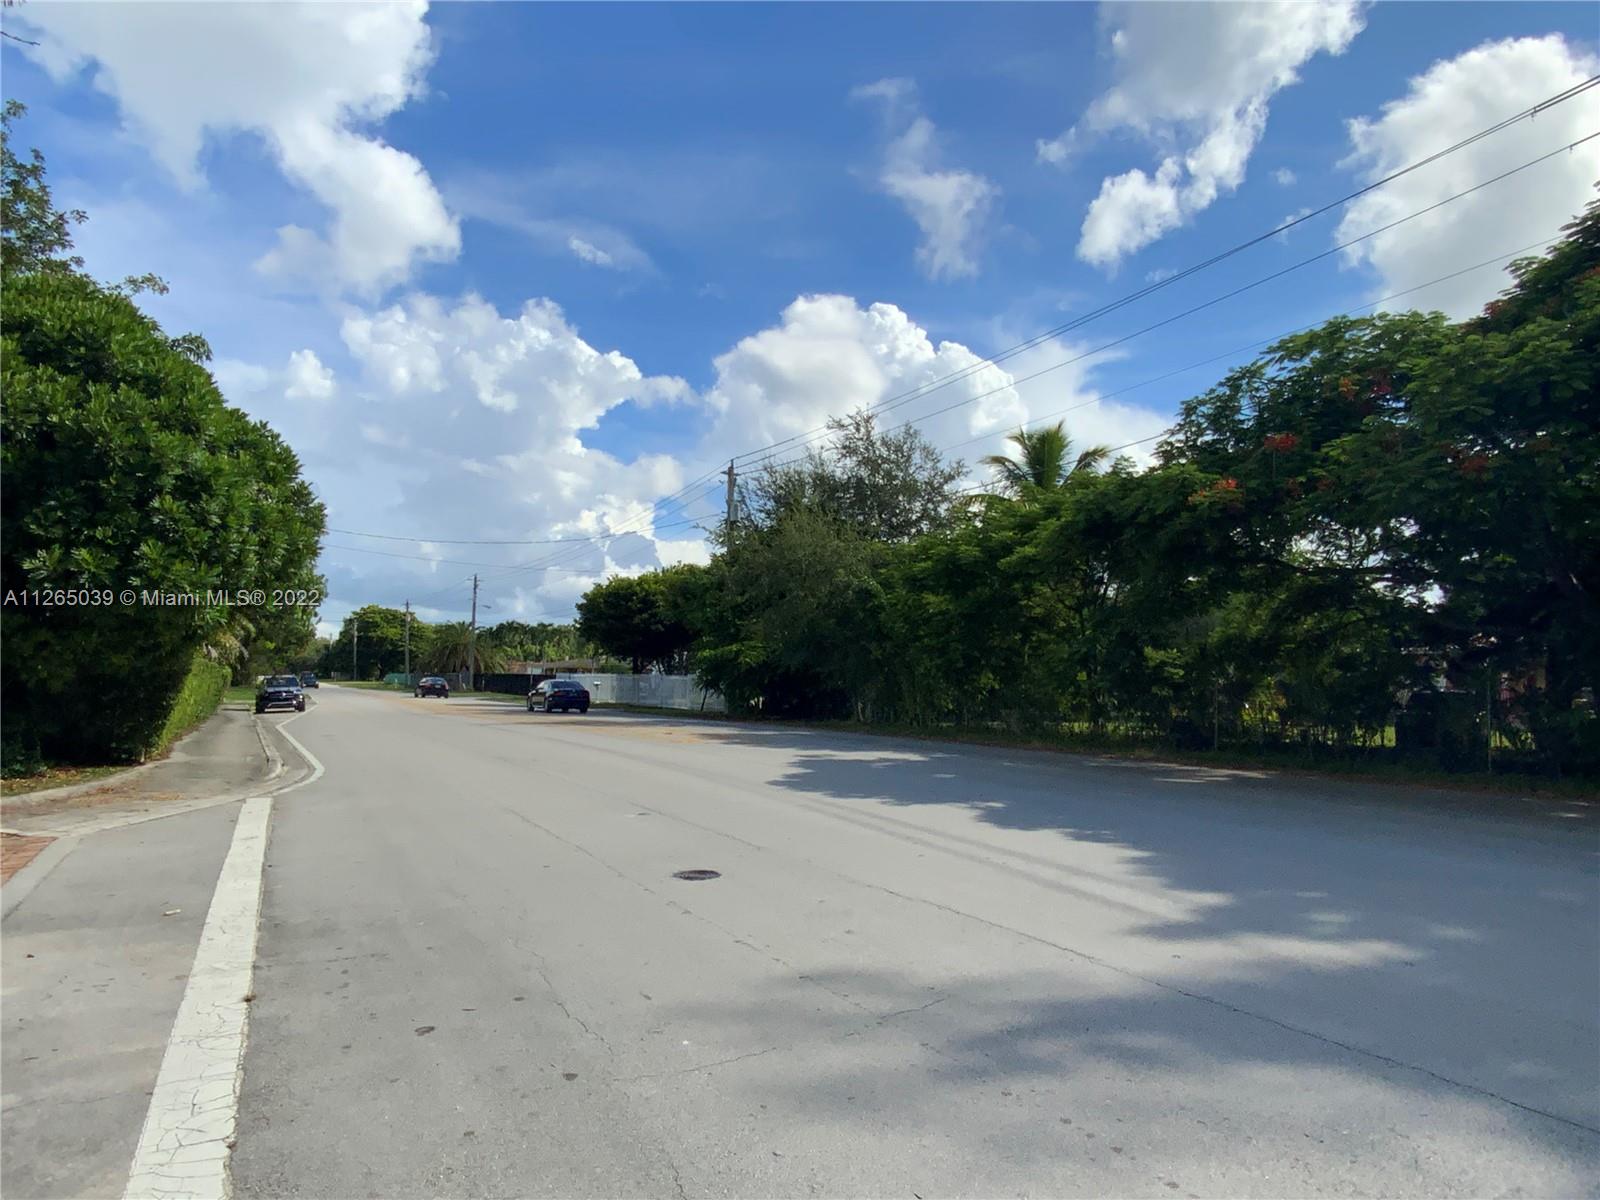 Fabulous location in Miami! Live in the highly desirable South Miami, minutes from Coral Gables, Pinecrest, Parks, Schools, Shopping Center and Highways. This is a 1.16-Acre (53,836 SQFT) Lot. Build your dream home. This area has been attracting multi million-dollar homes development recently, due to large lots in the area. This property is being sold AS IS for Land Value only. Sale is subject to court approval.